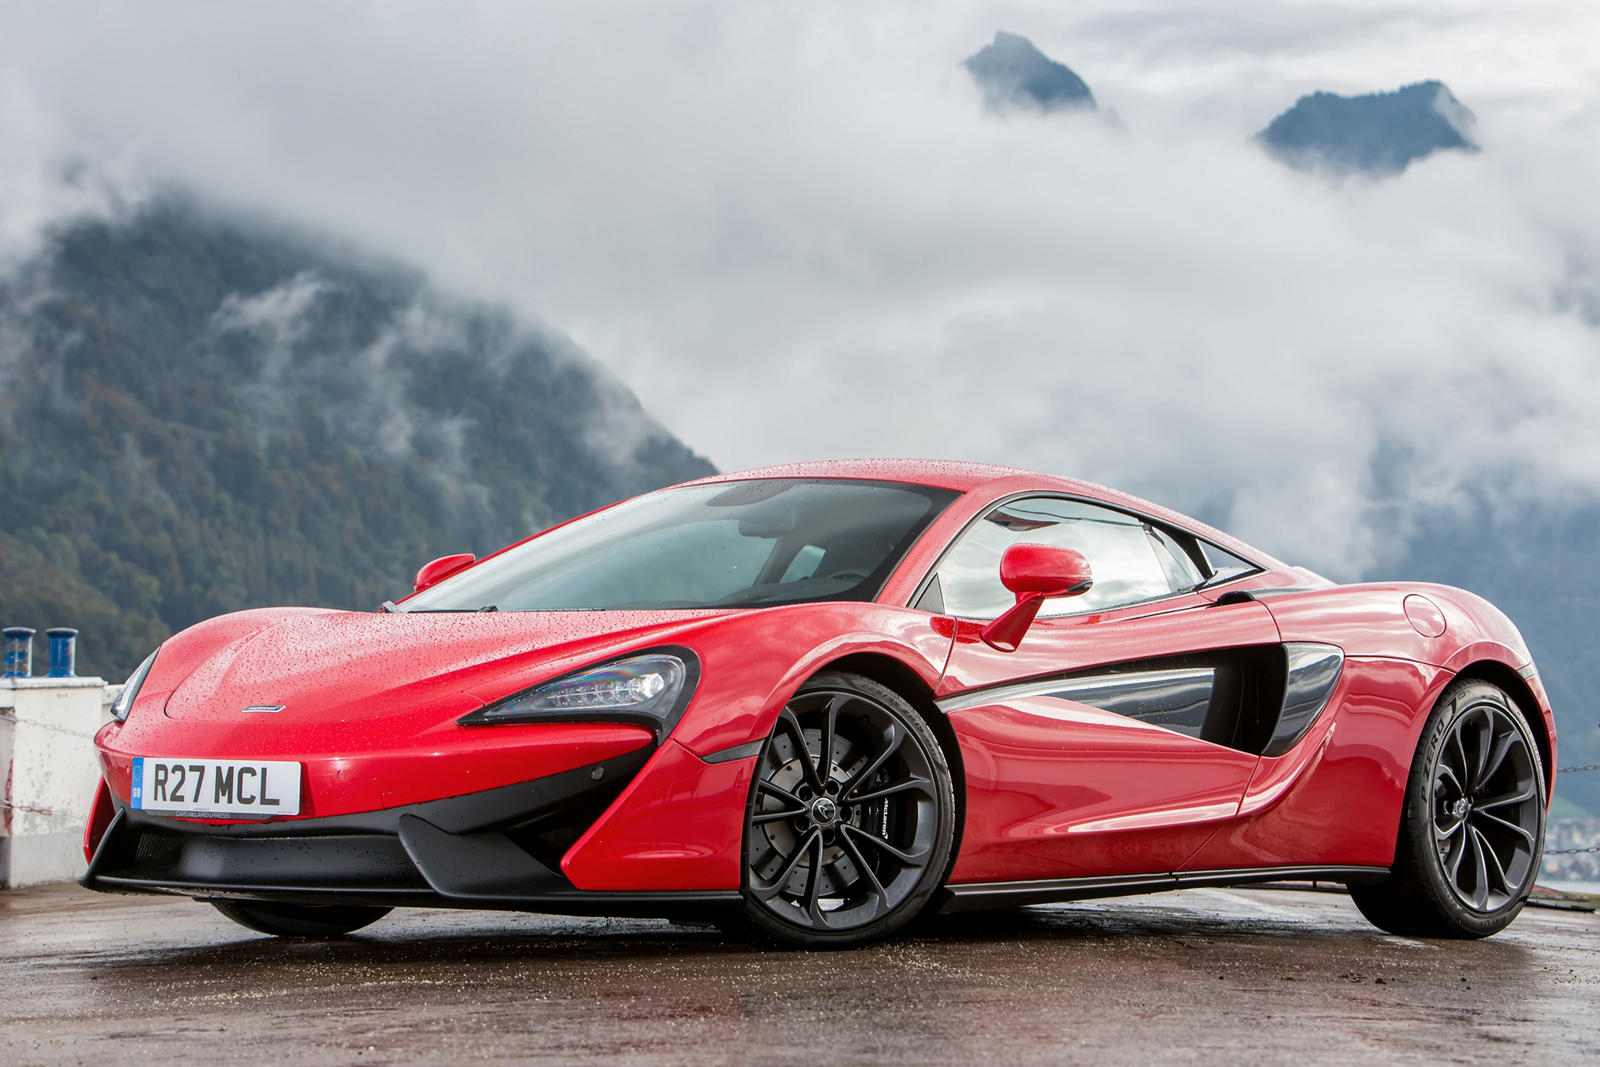 Used McLaren 540C. Check 540C for sale in USA: prices of every